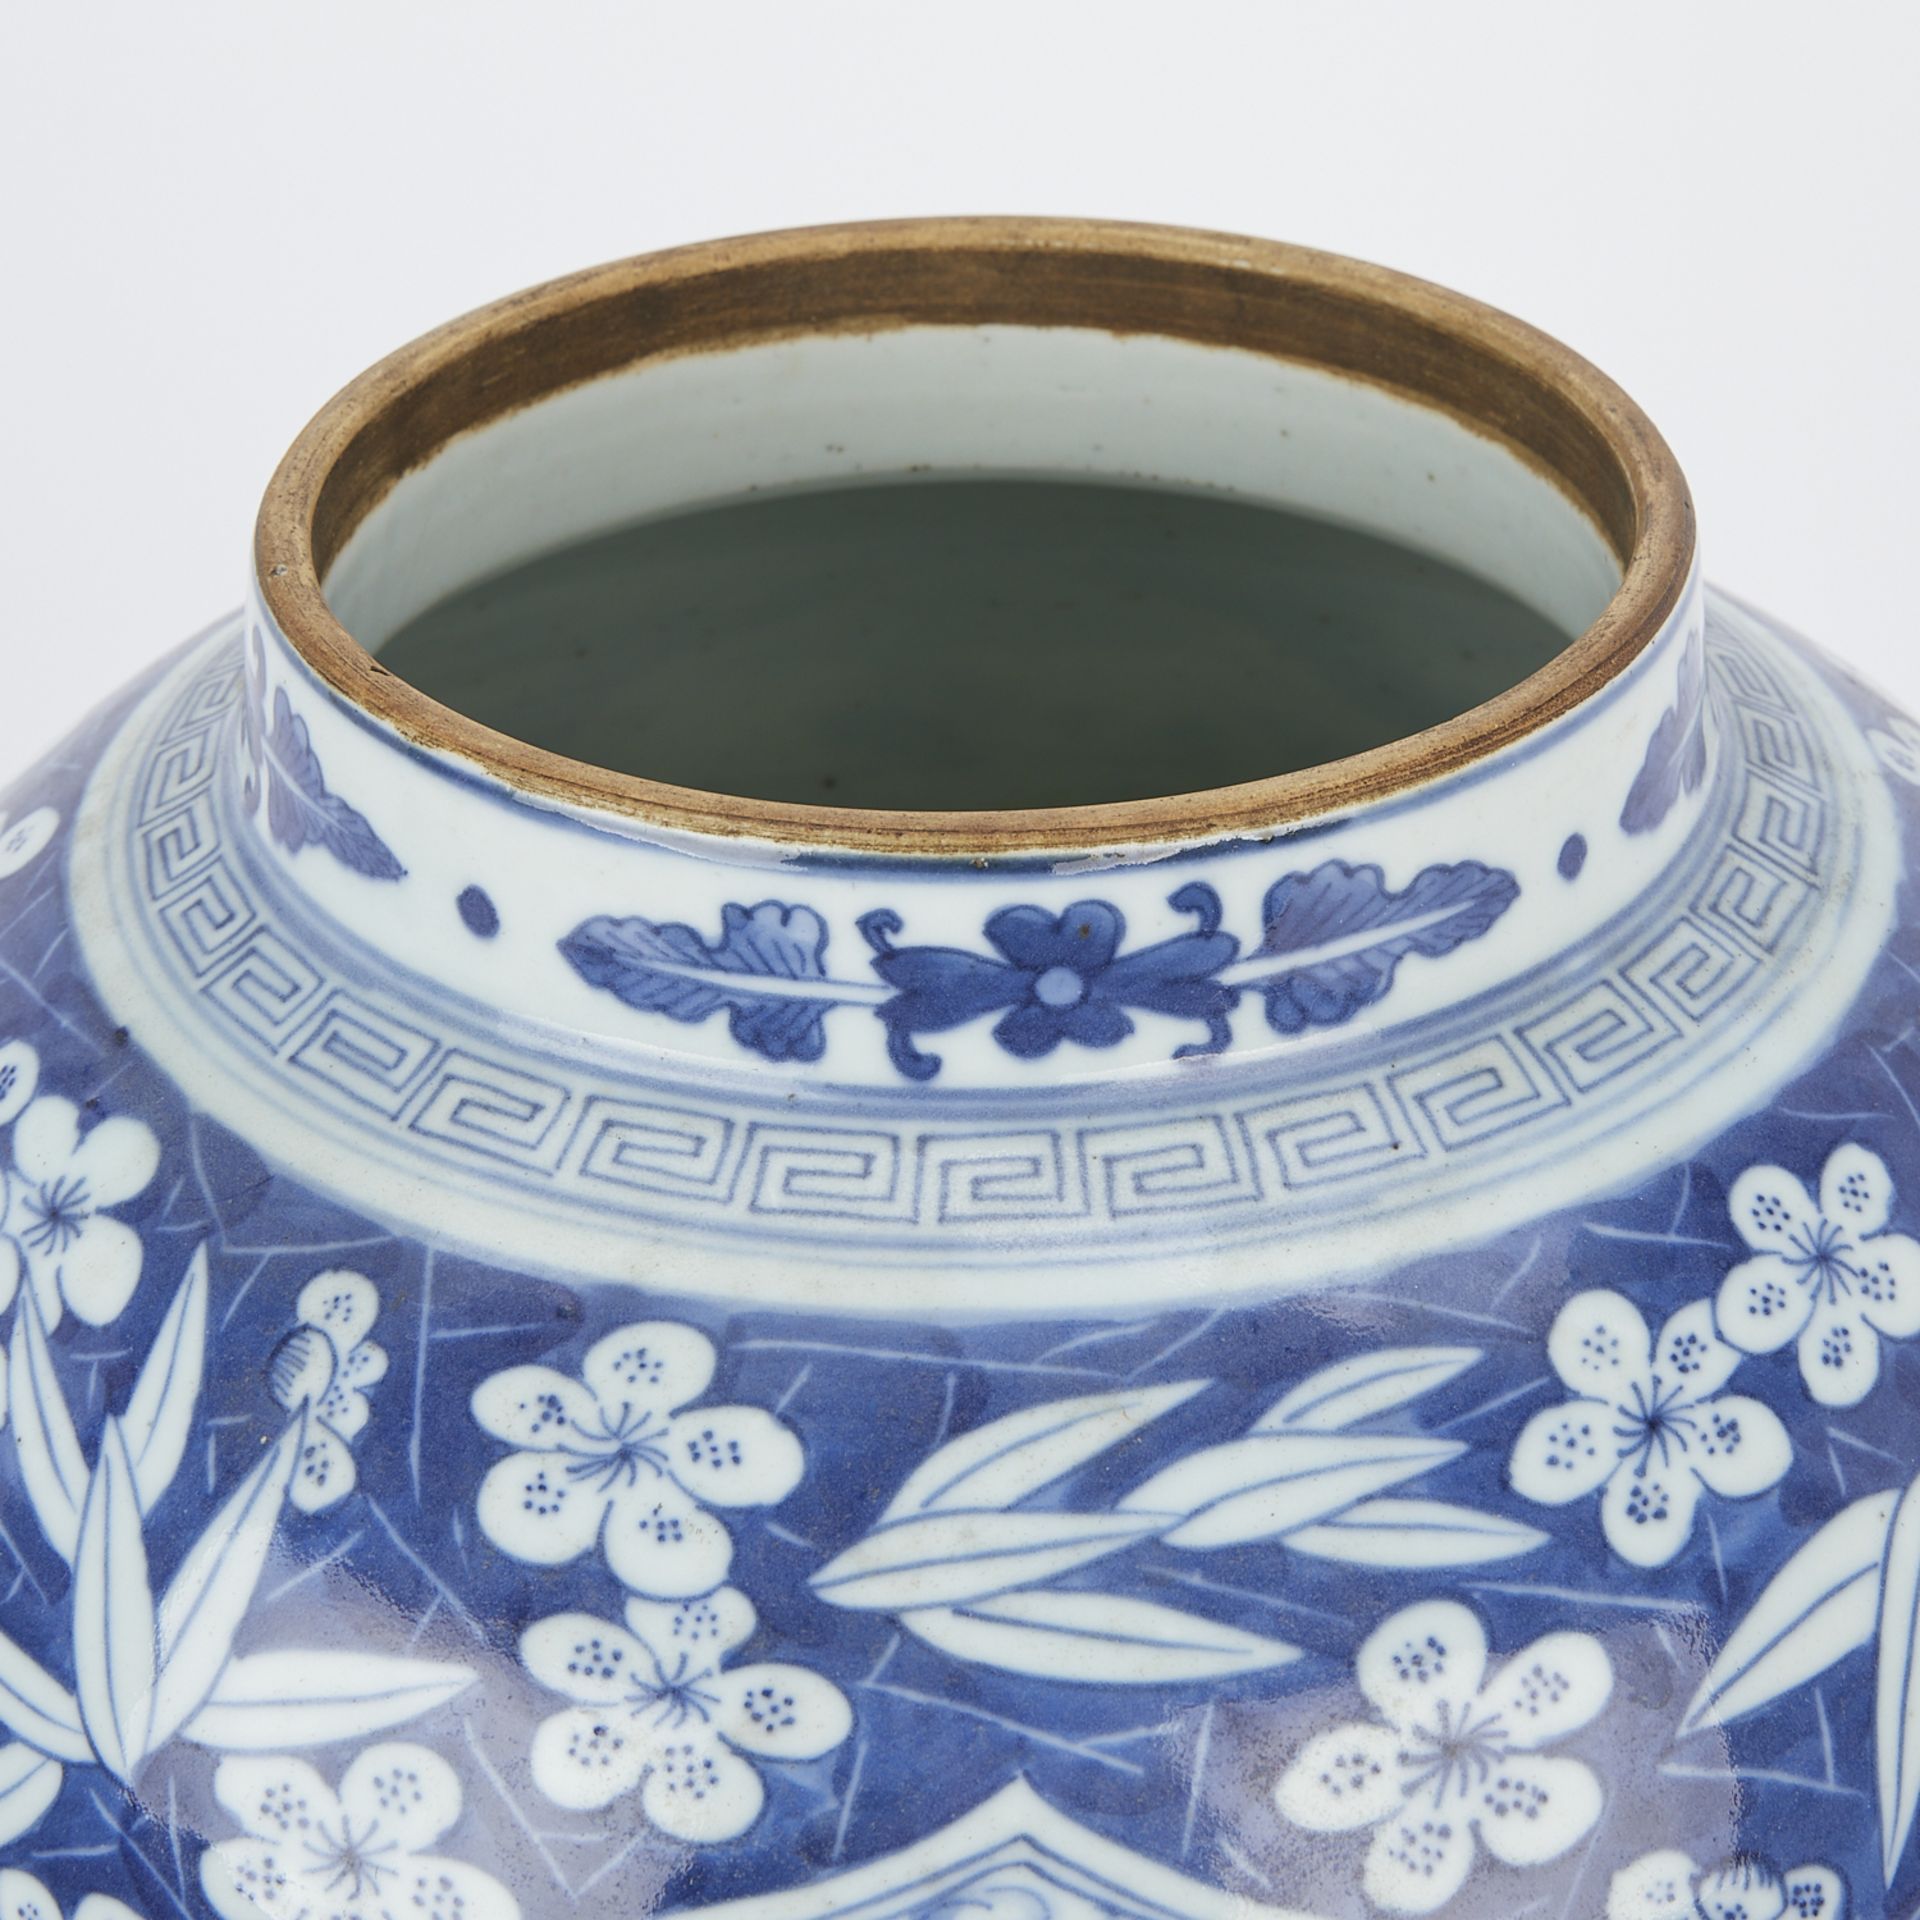 18th/19th c. Chinese B&W Porcelain Baluster Vase - Image 2 of 15